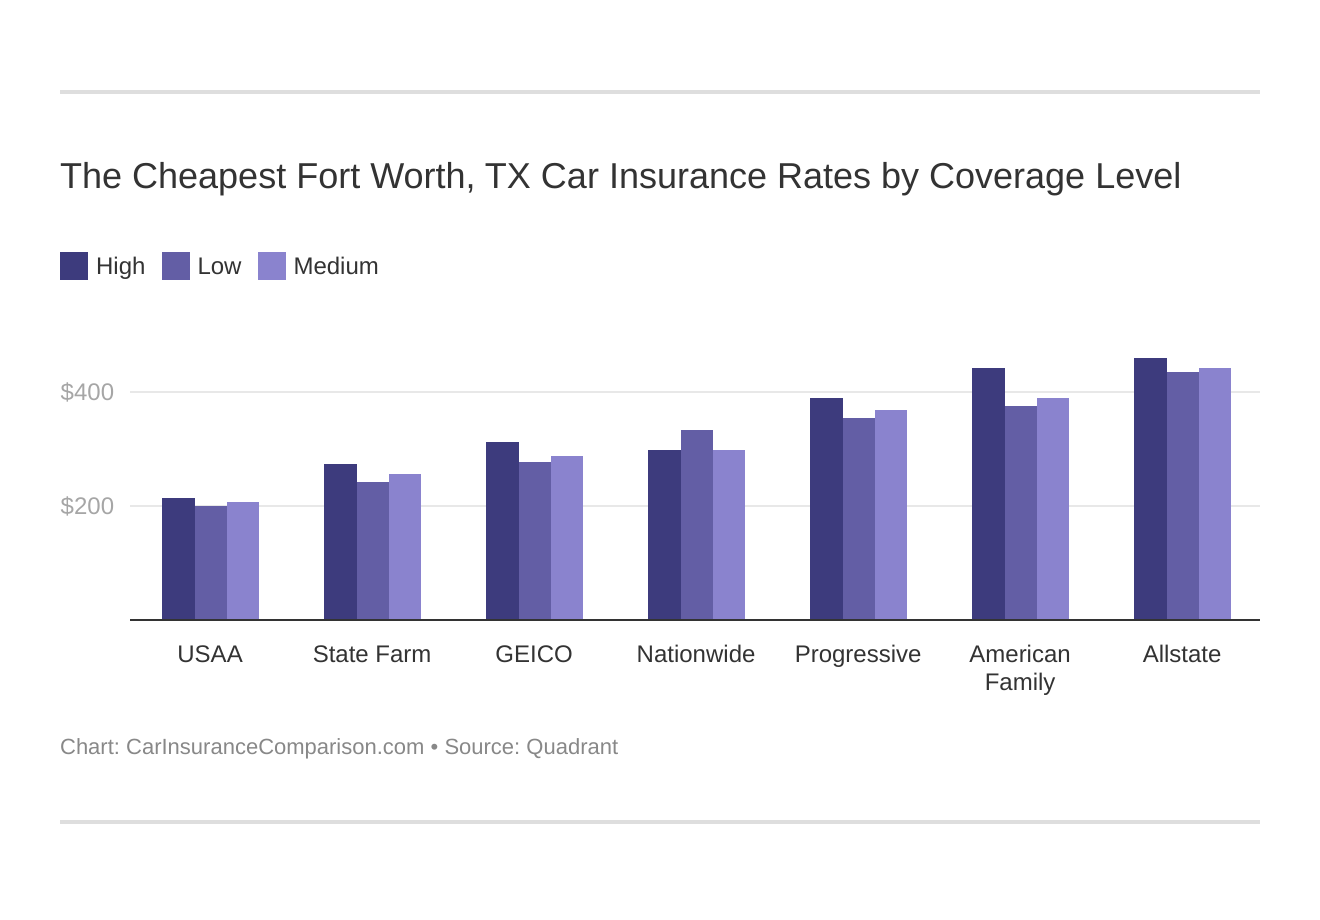 The Cheapest Fort Worth, TX Car Insurance Rates by Coverage Level